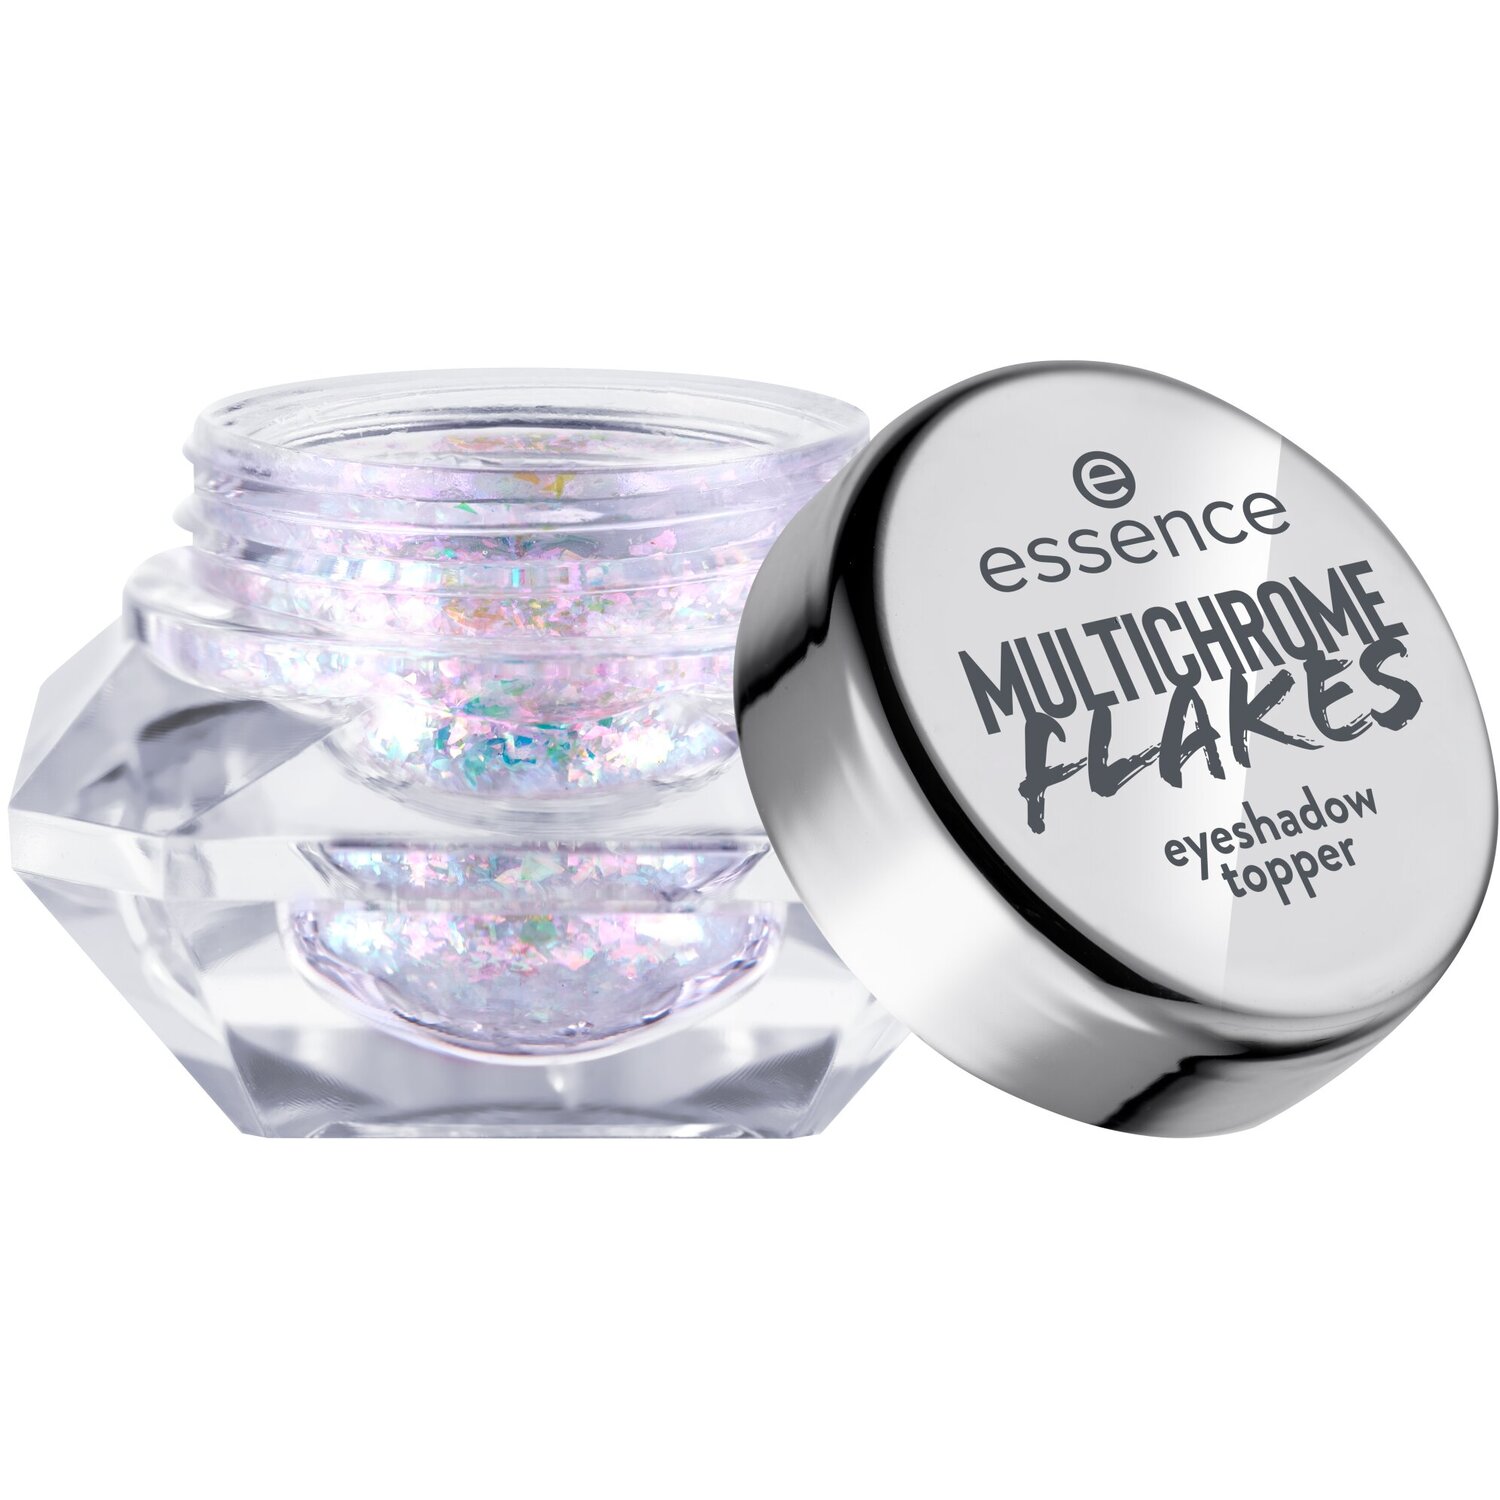 essence Multichrome Flakes Eyeshadow Topper - Silver Image 1